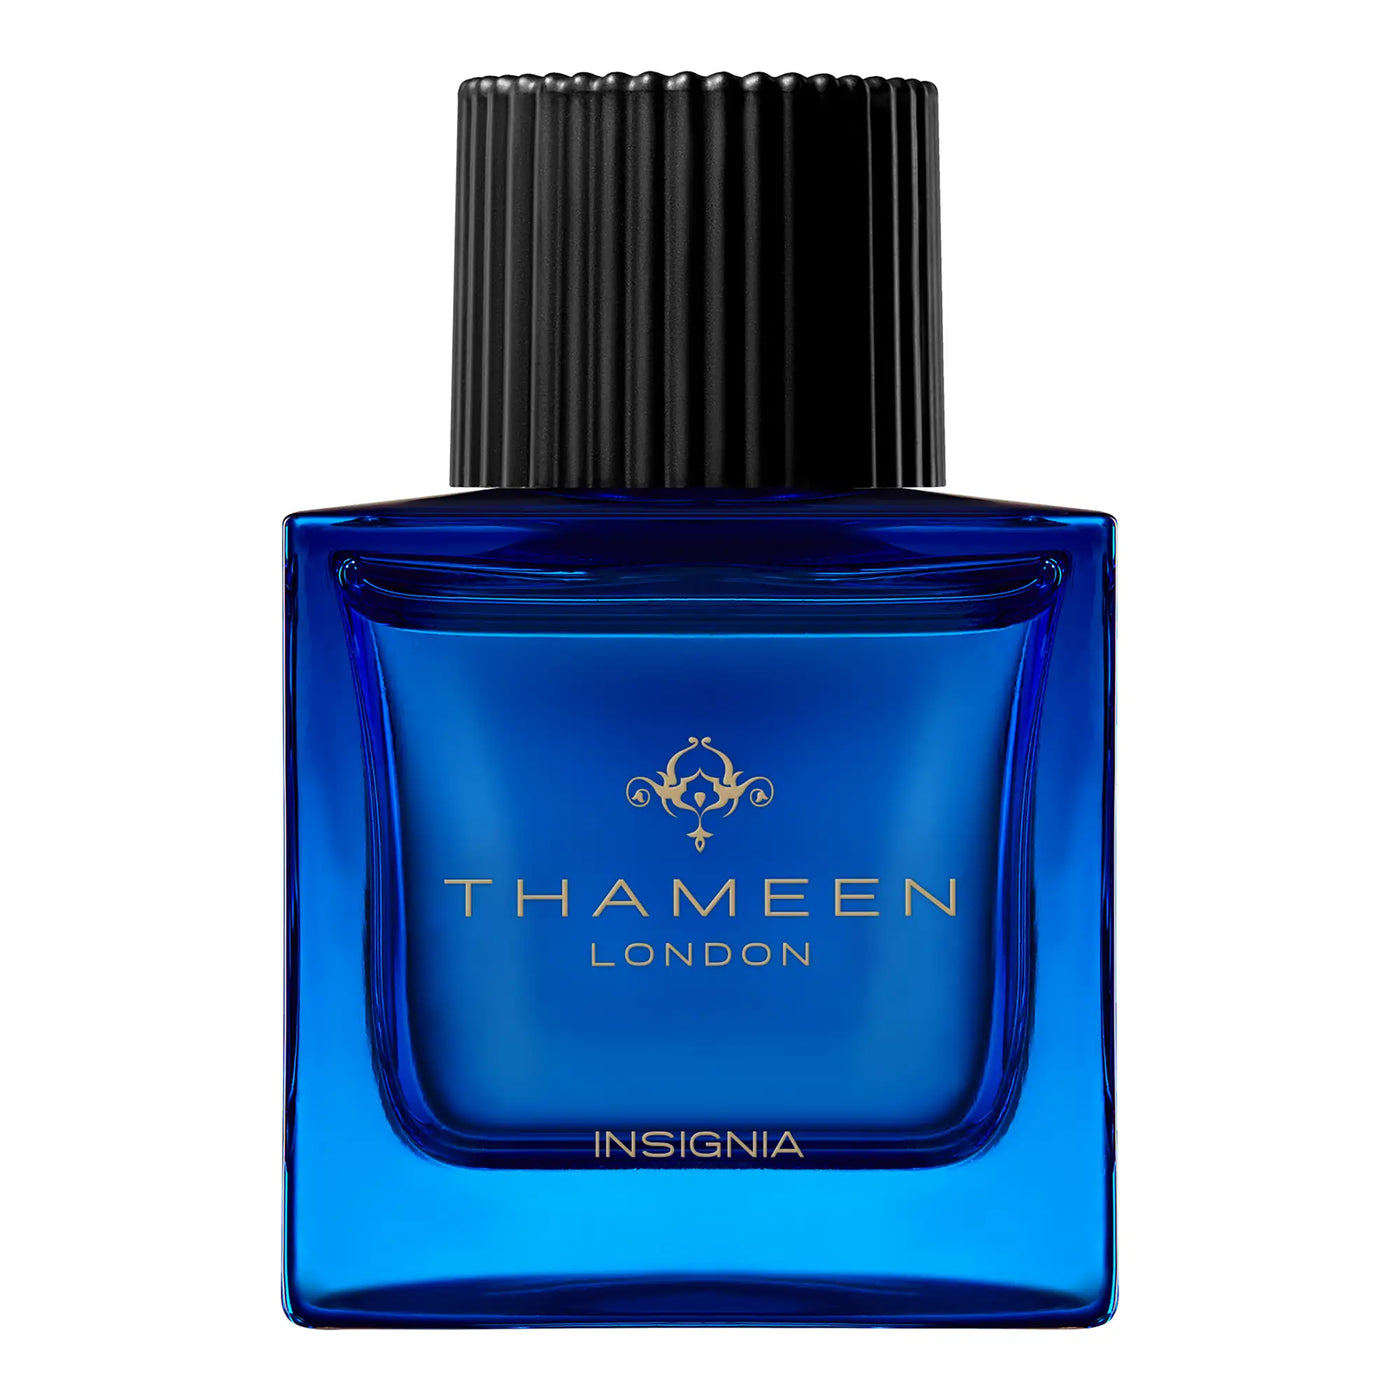 Thameen London Insignia - 50ml - Gharyal by Collectibles 